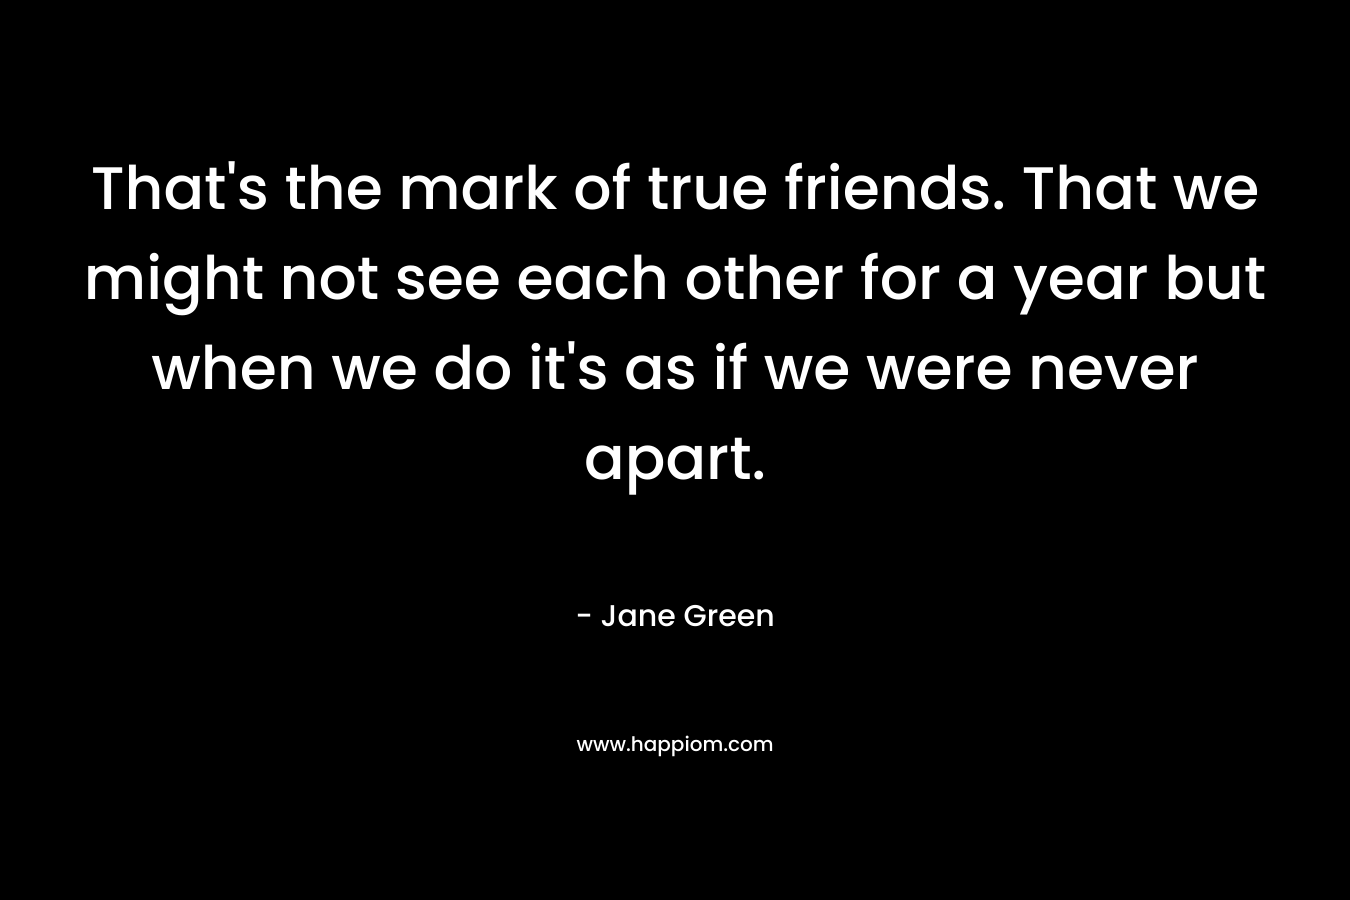 That's the mark of true friends. That we might not see each other for a year but when we do it's as if we were never apart.